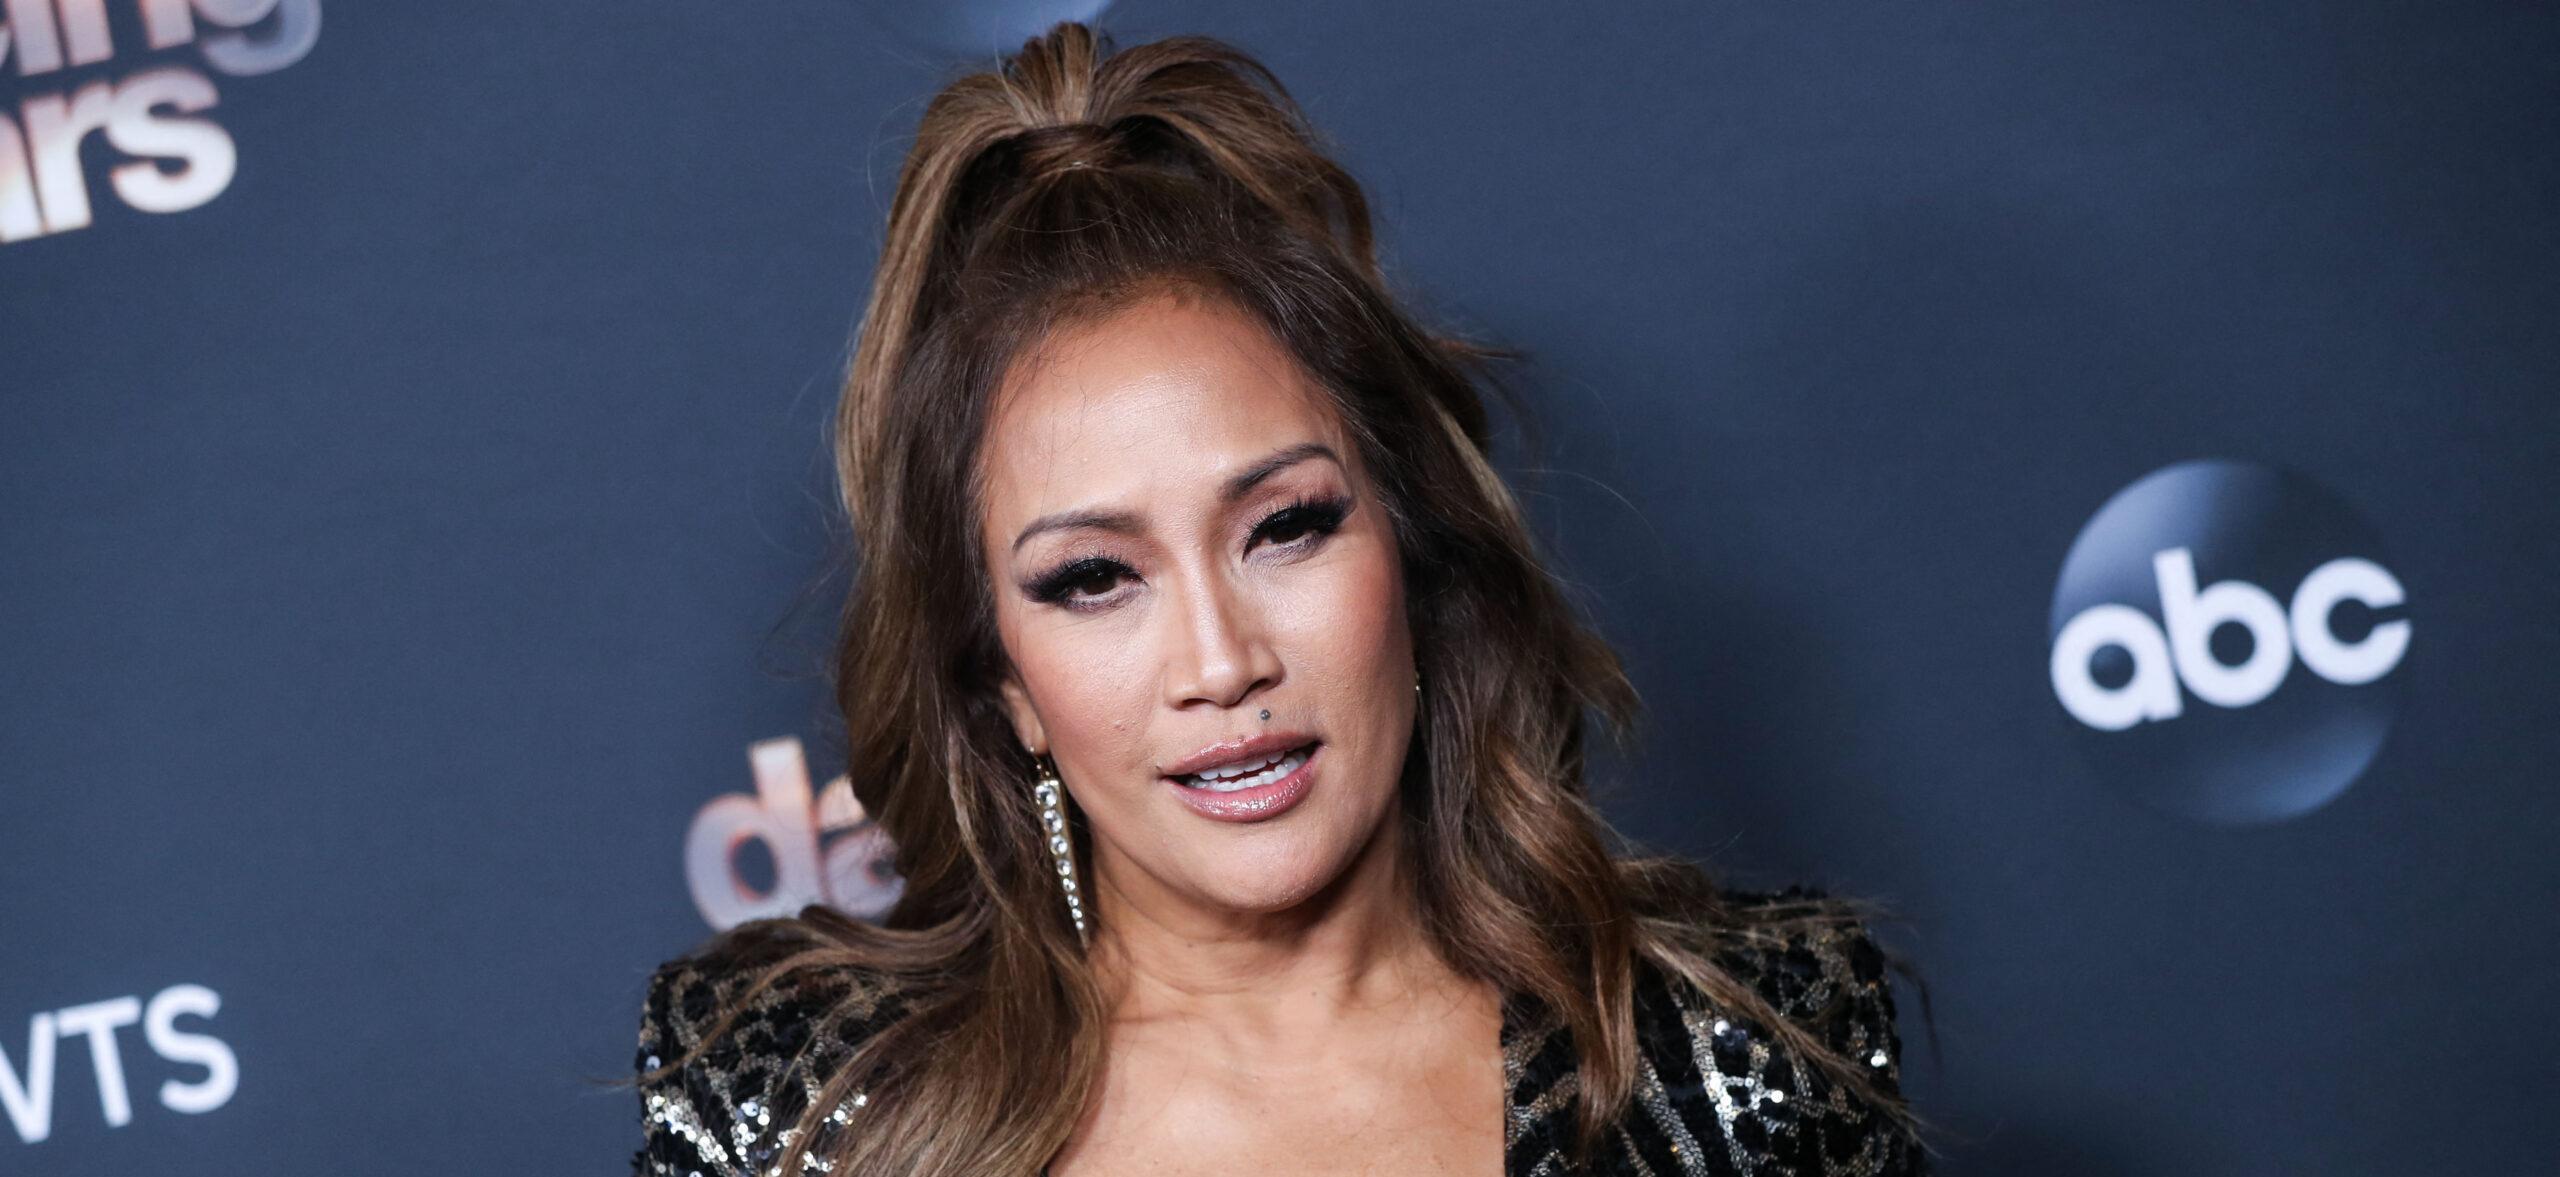 ///Carrie Ann Inaba DWTS scaled e